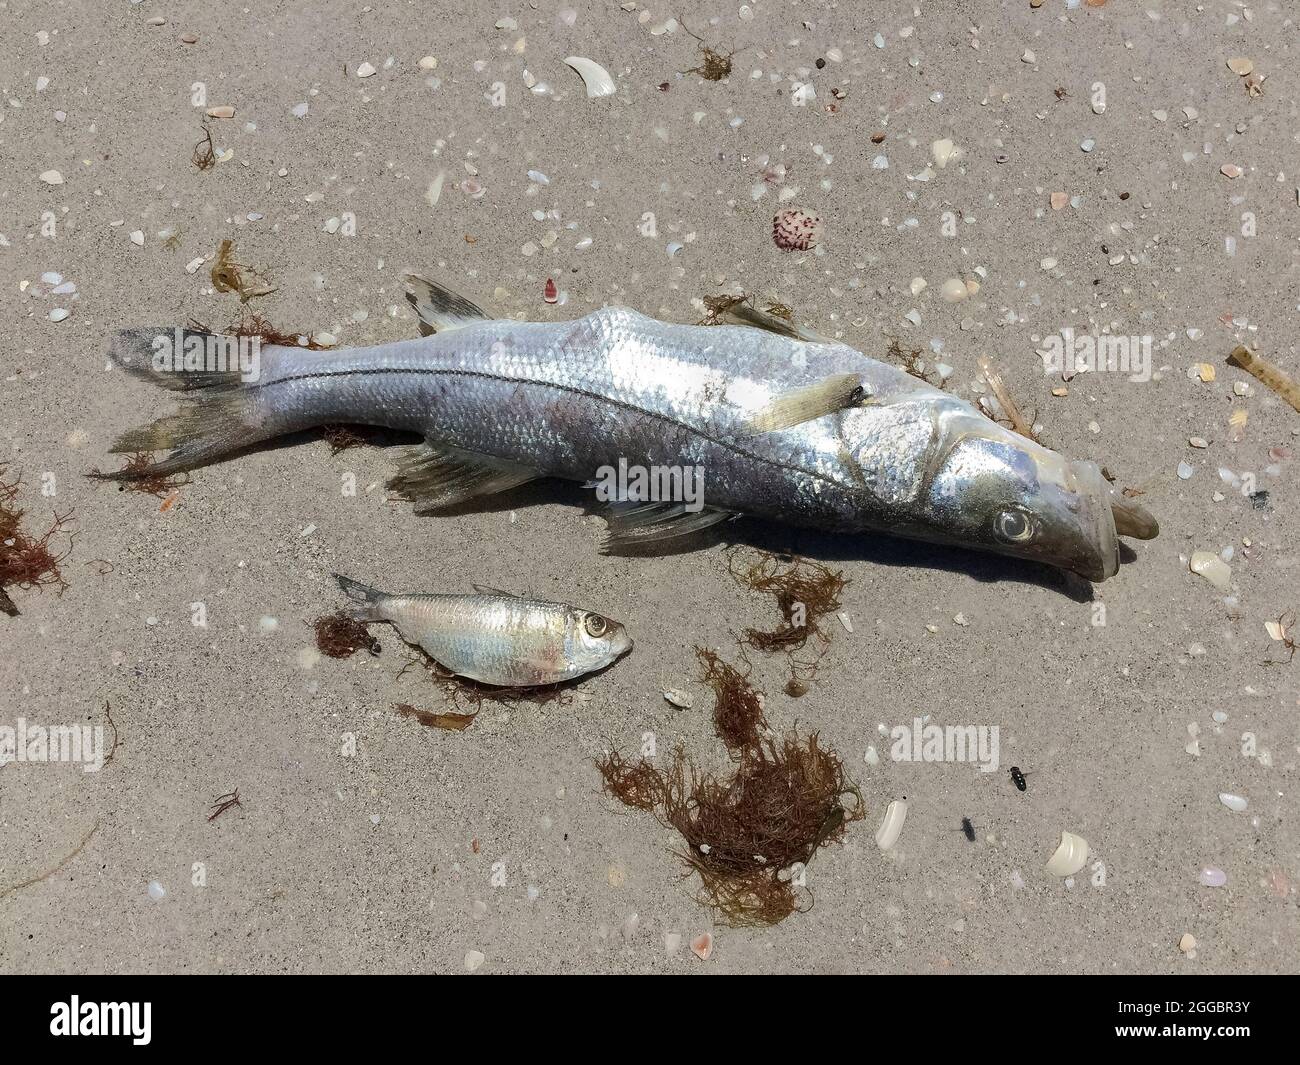 A close-up of two of the thousands of large and small fish that washed ashore on sandy beaches along Casey Key after dying from a red tide in the Gulf of Mexico on the west coast of Florida, USA. A red tide is a higher-than-normal concentration of a microscopic alga that produces toxic chemicals harmful to both marine life and humans. In addition to its unpleasant smell, a red tide can create airborne toxins that cause serious illness in people with severe or chronic respiratory conditions, such as emphysema or asthma. Red tides have been documented along Florida's Gulf coast since the 1840s. Stock Photo